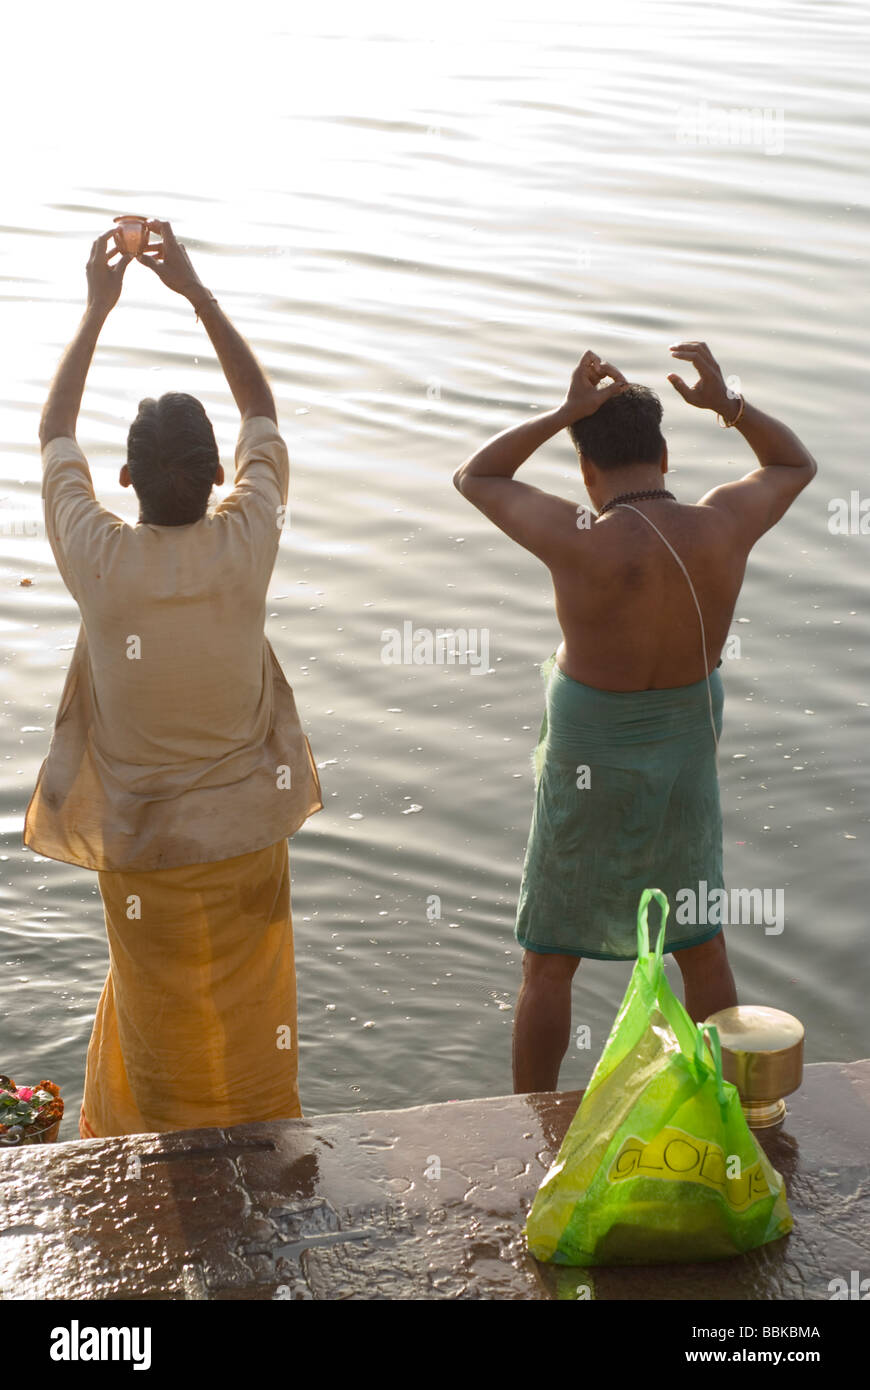 Holy men (brahmins) praying and making offering for river Ganges, holy for the Hindu. Bathing ghats, Varanasi, India. Stock Photo